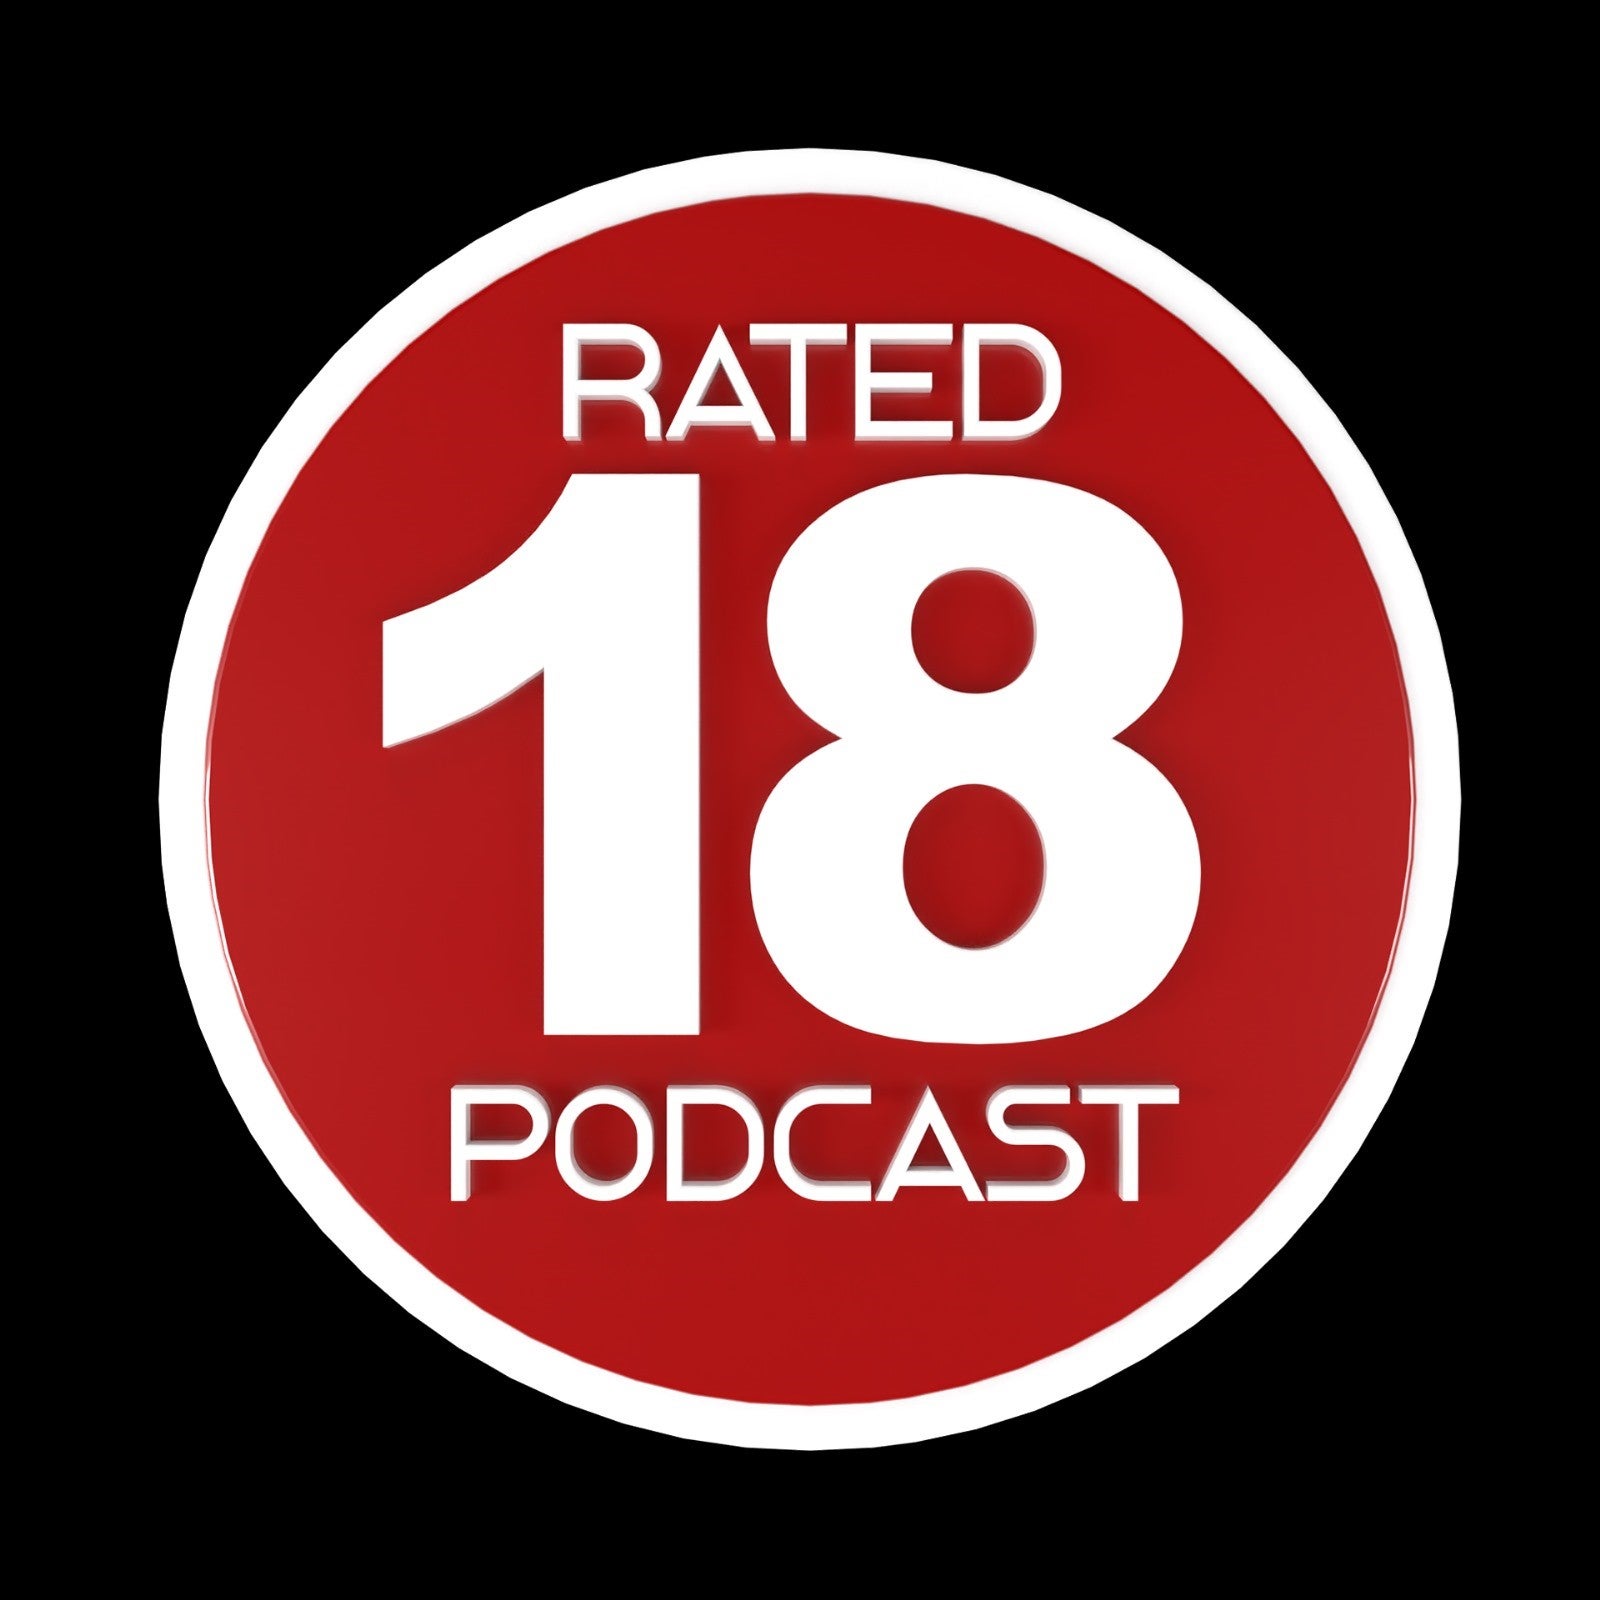 (Rated 18 Podcast/PA)